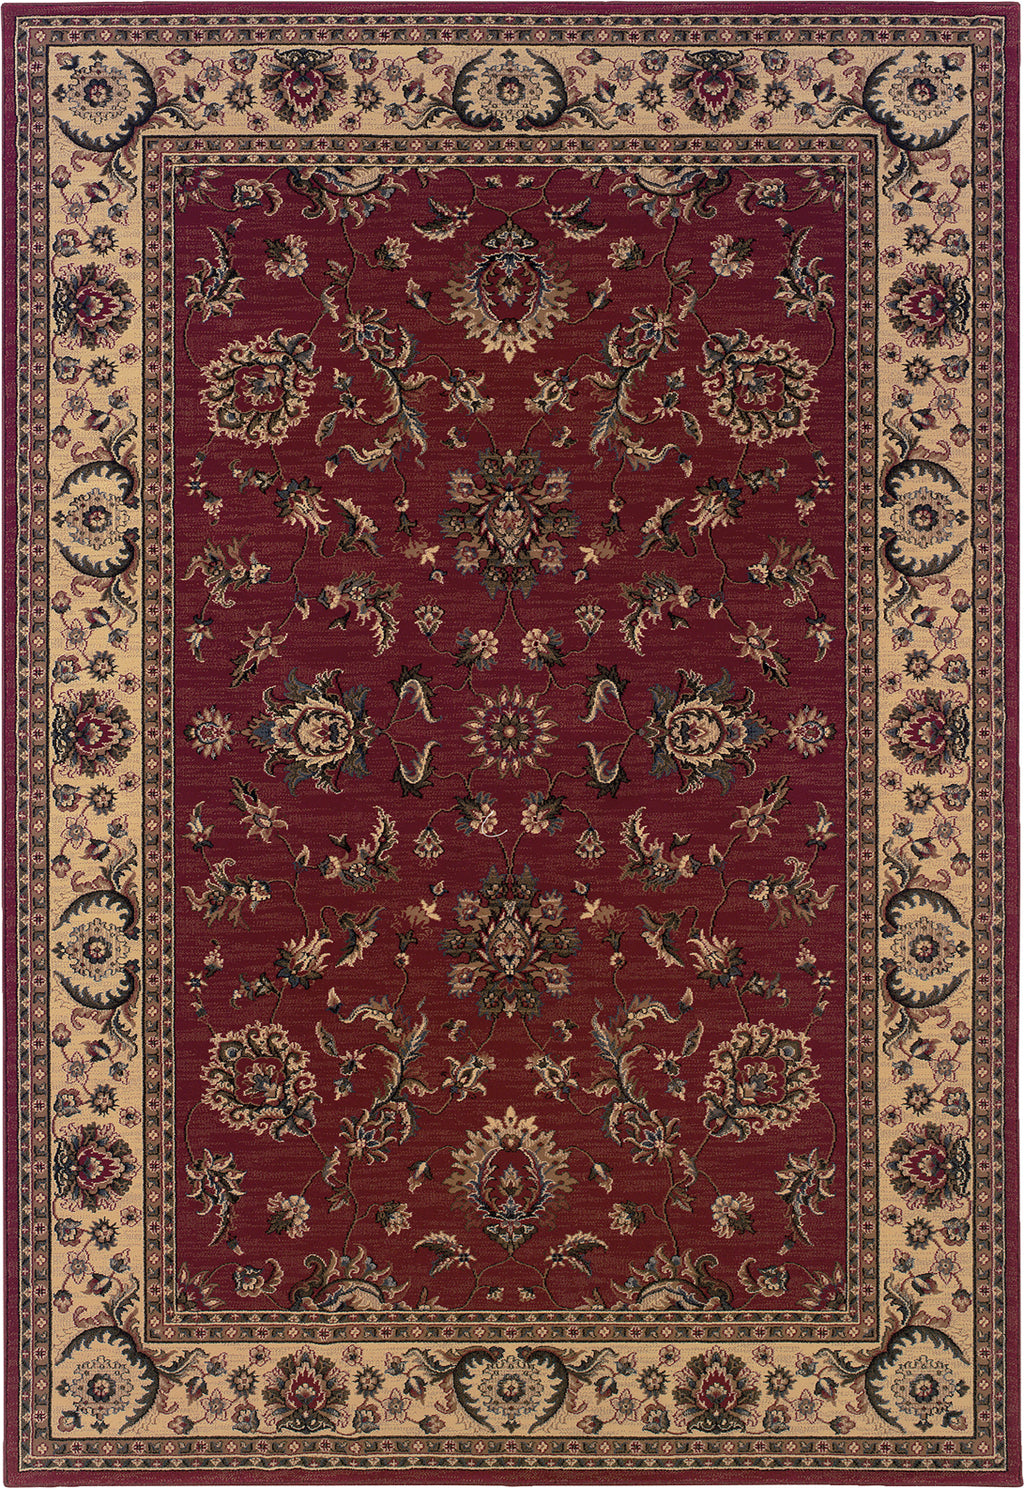 Oriental Weavers Ariana 311C3 Red/Ivory Area Rug main image Featured